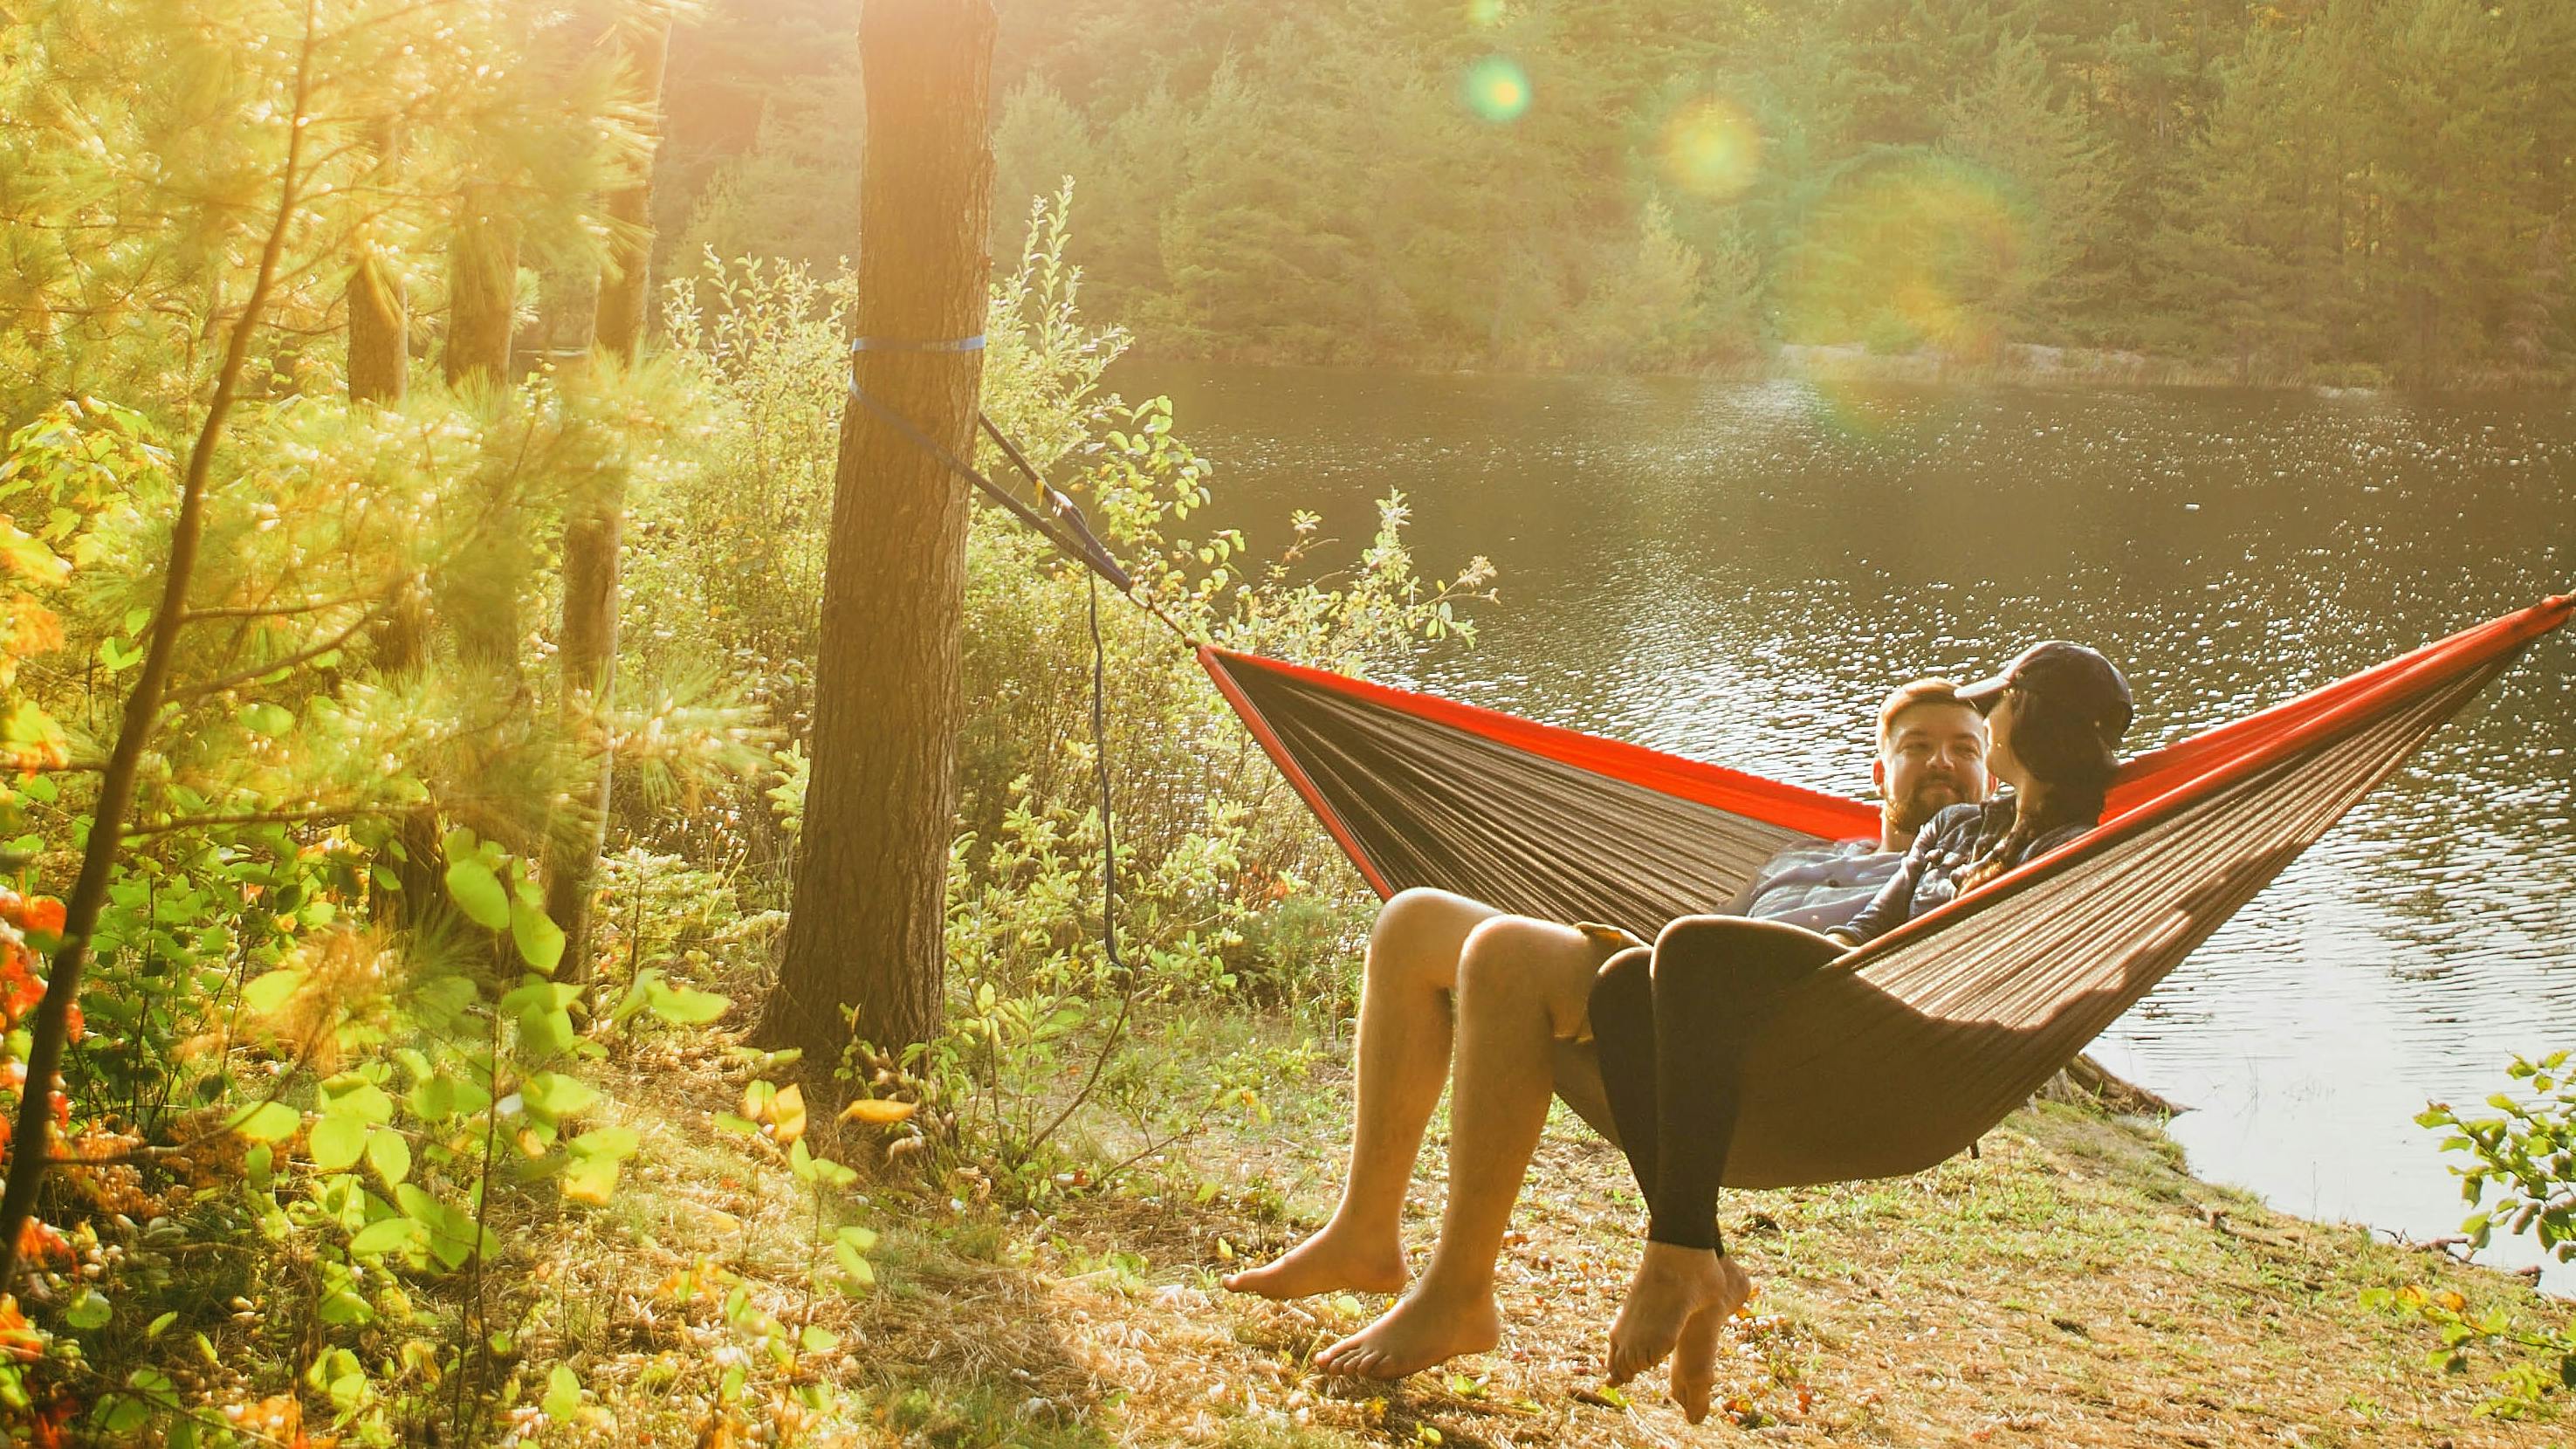 Two people sit in a hammock by a lake